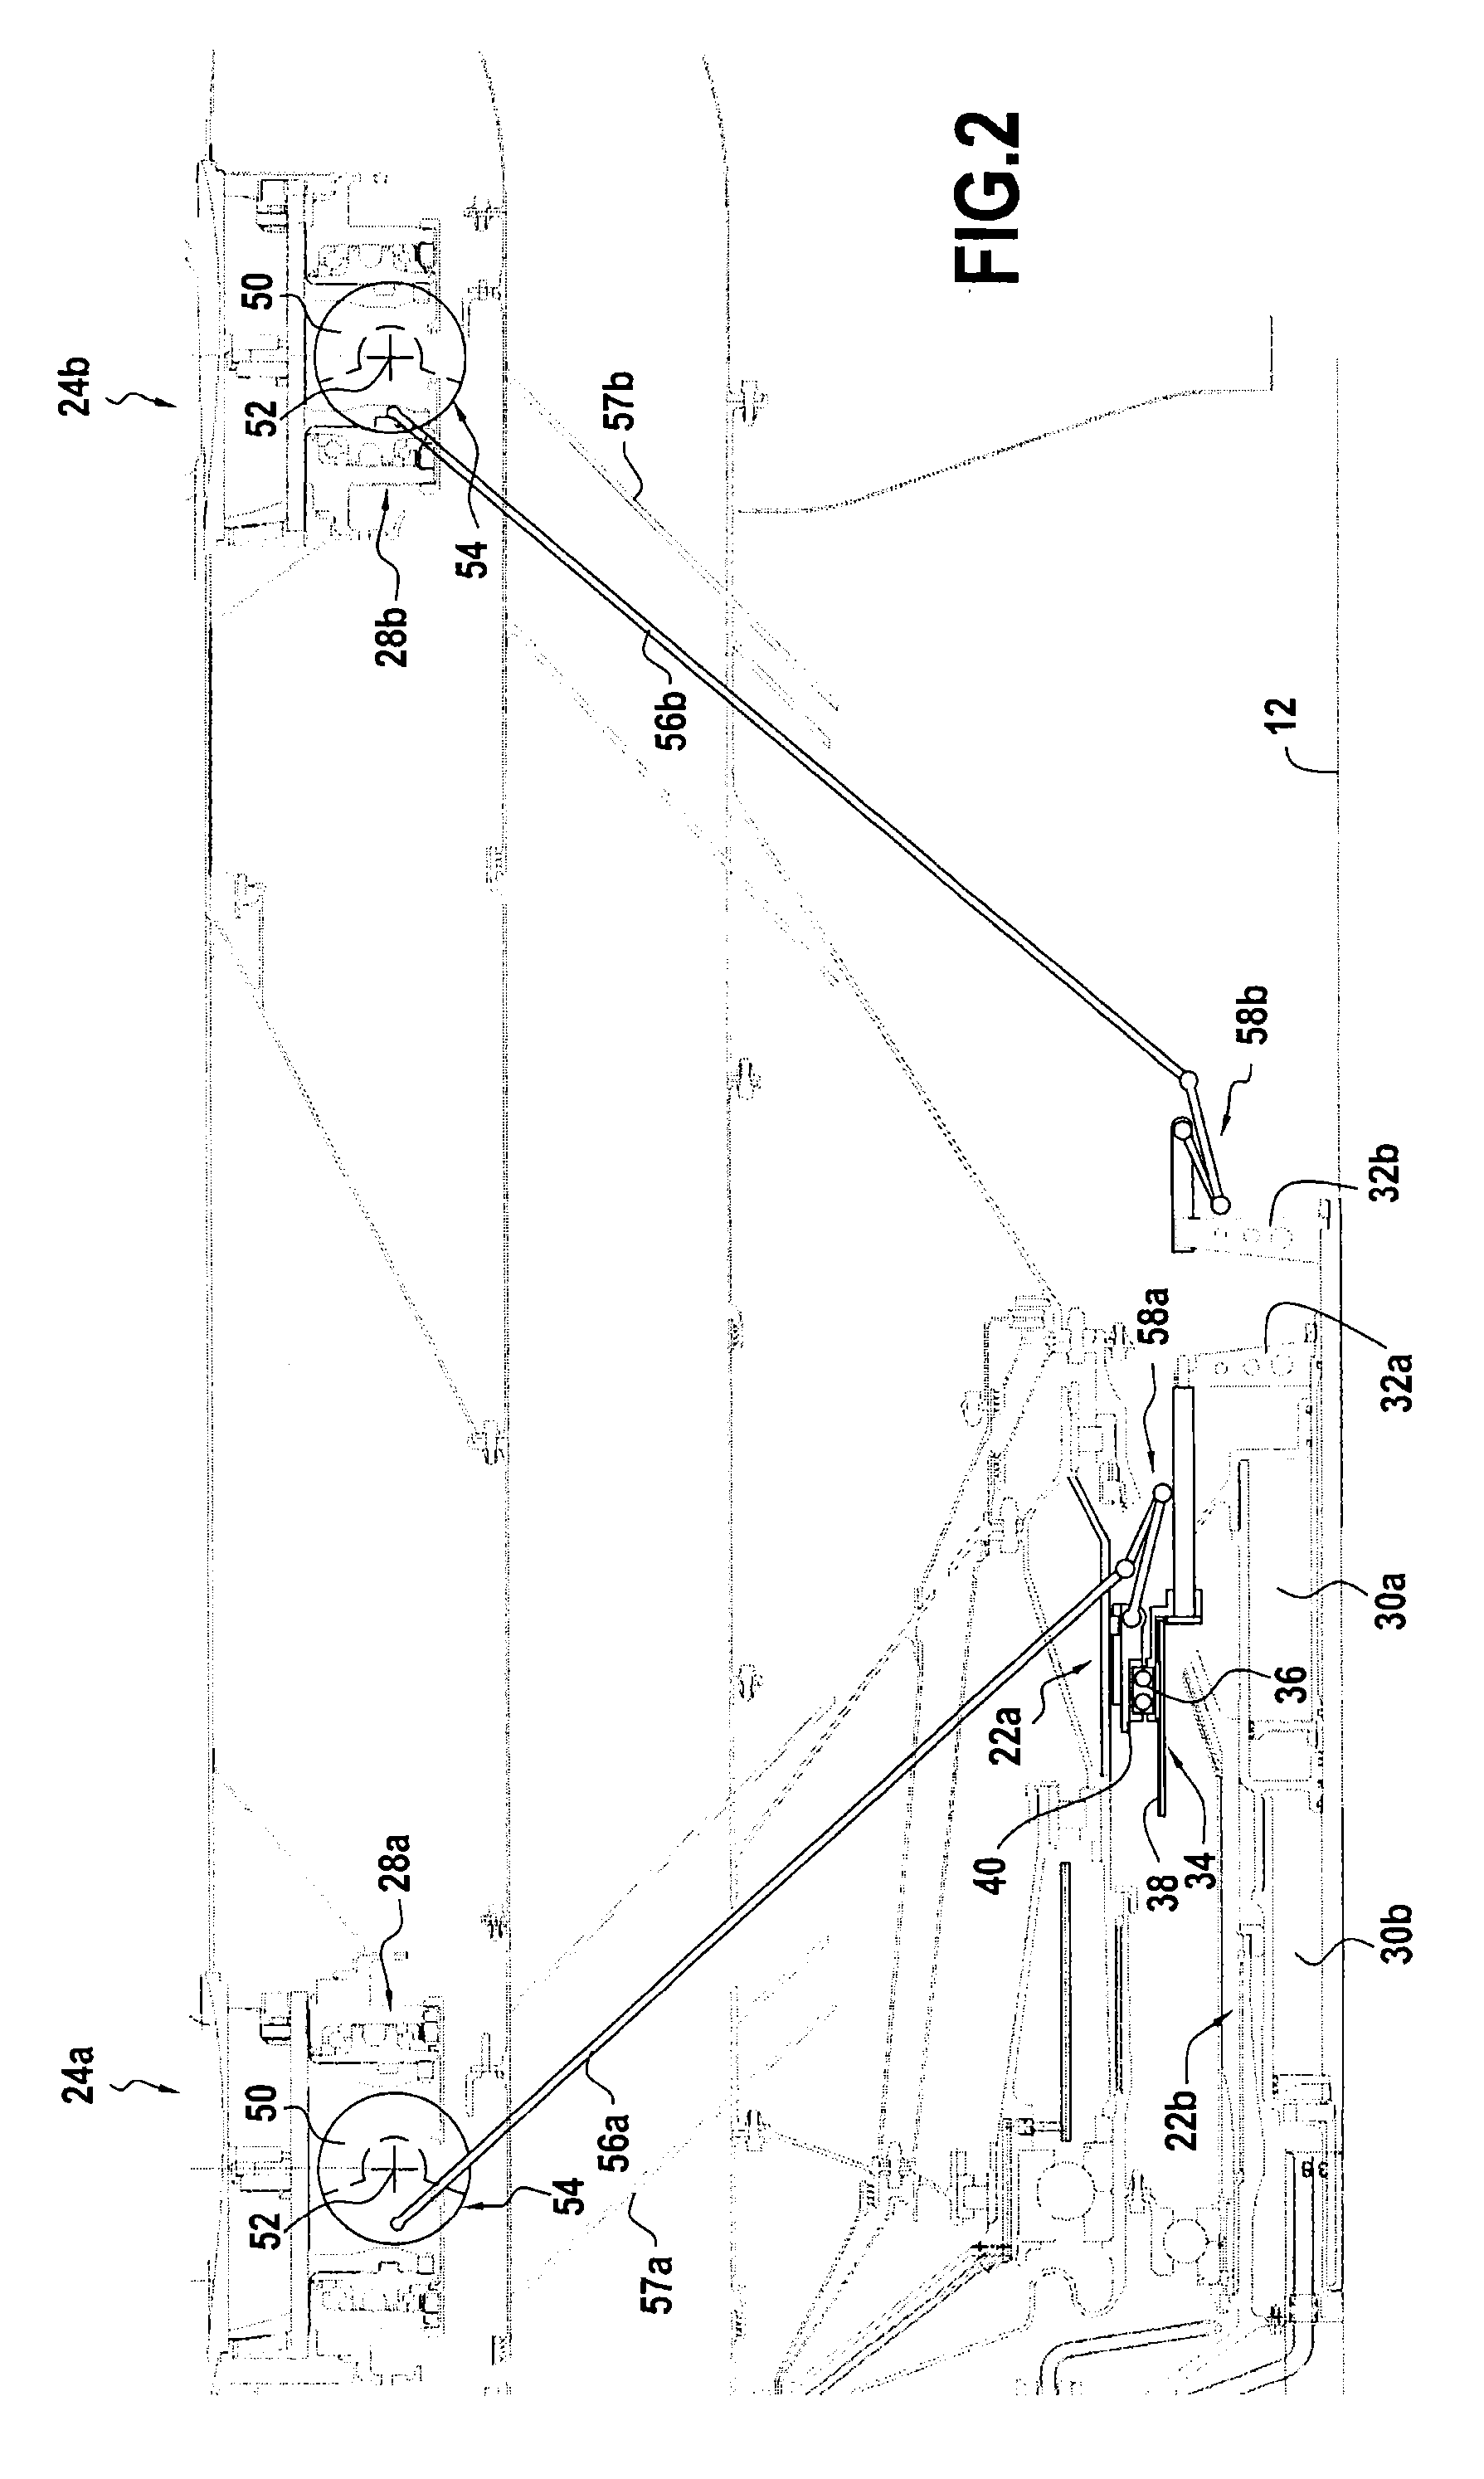 Counterweight-based device for controlling the orientation of fan blades of a turboprop engine